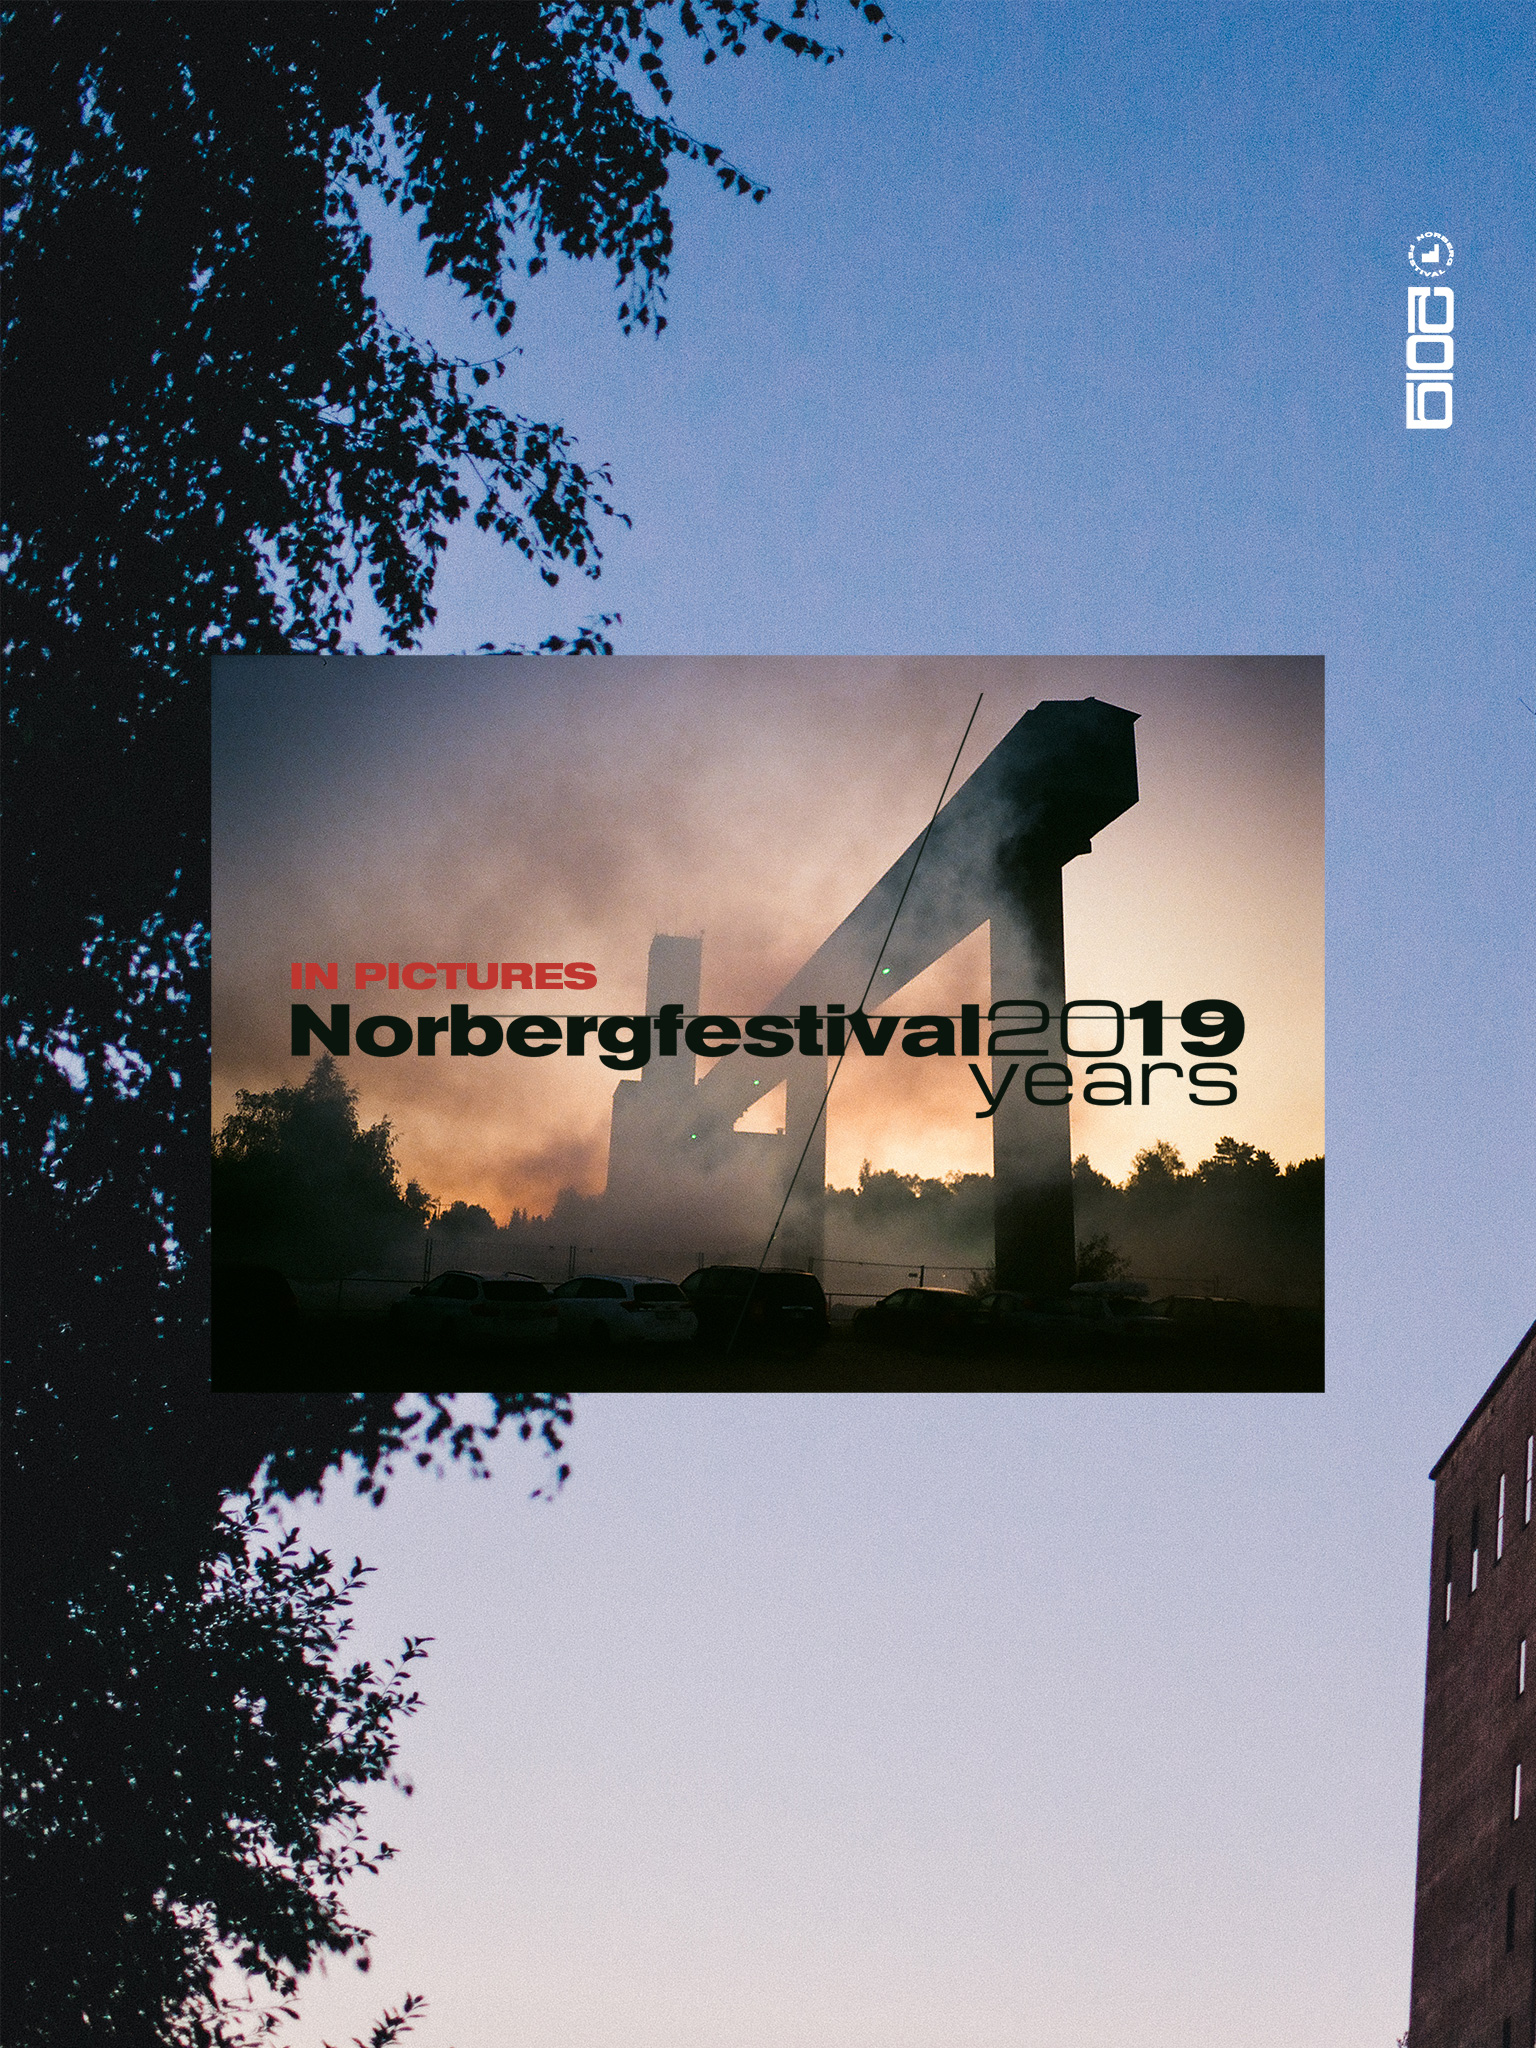 Norbergfestival 2019 in pictures